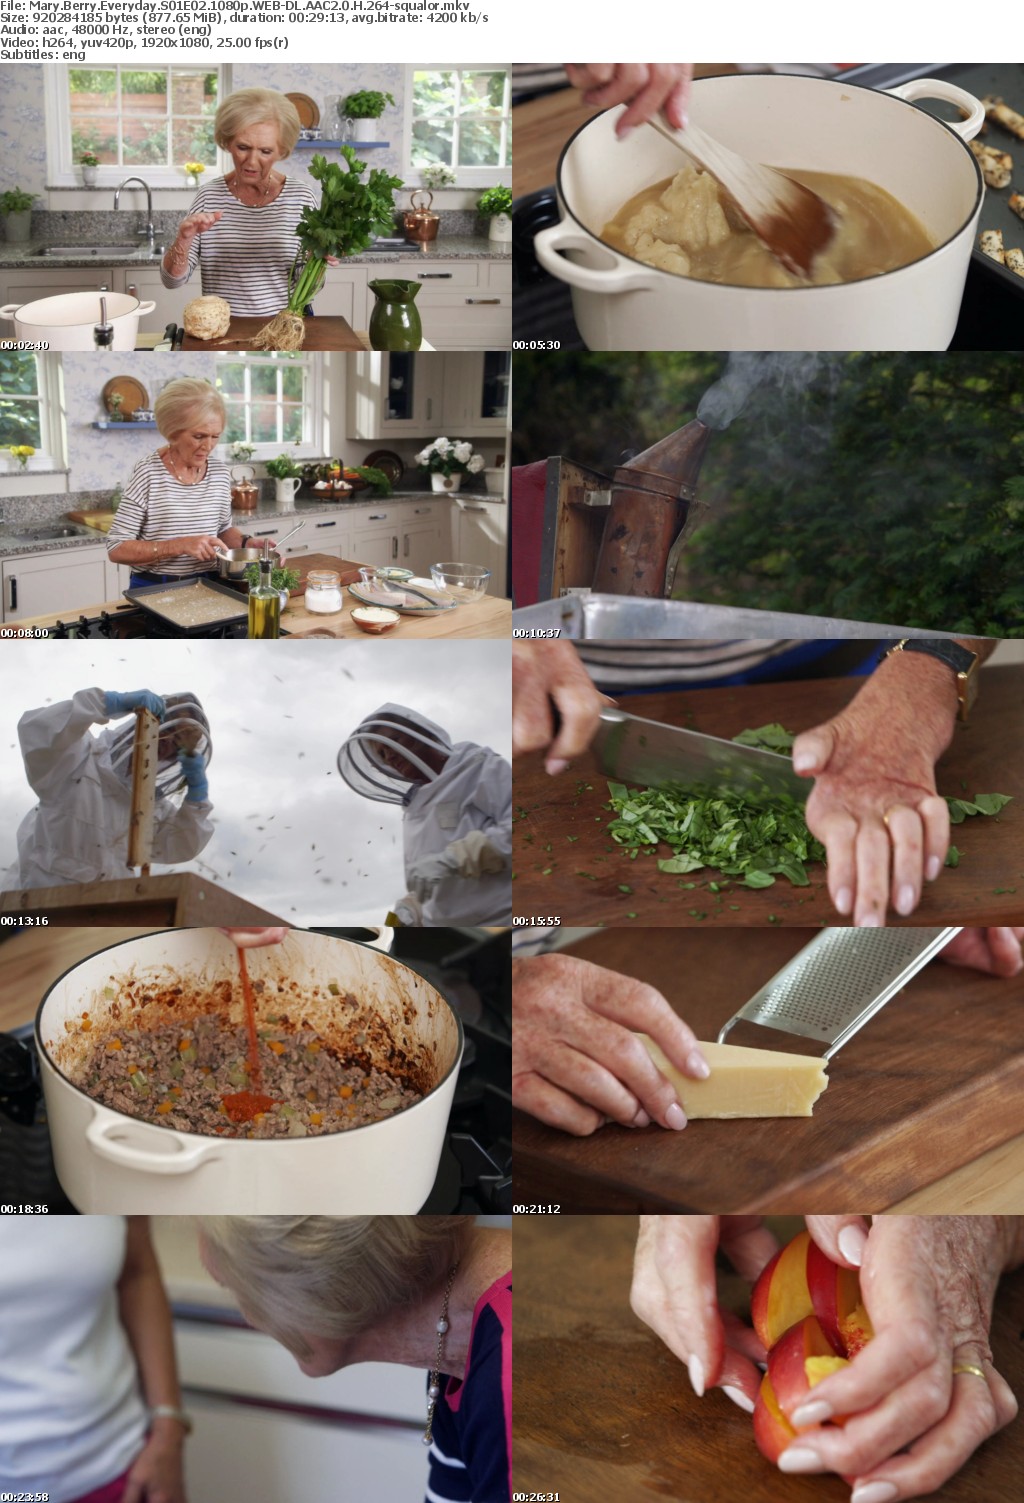 Mary Berry Everyday S01 1080p NF WEBRip AAC2 0 x264-squalor